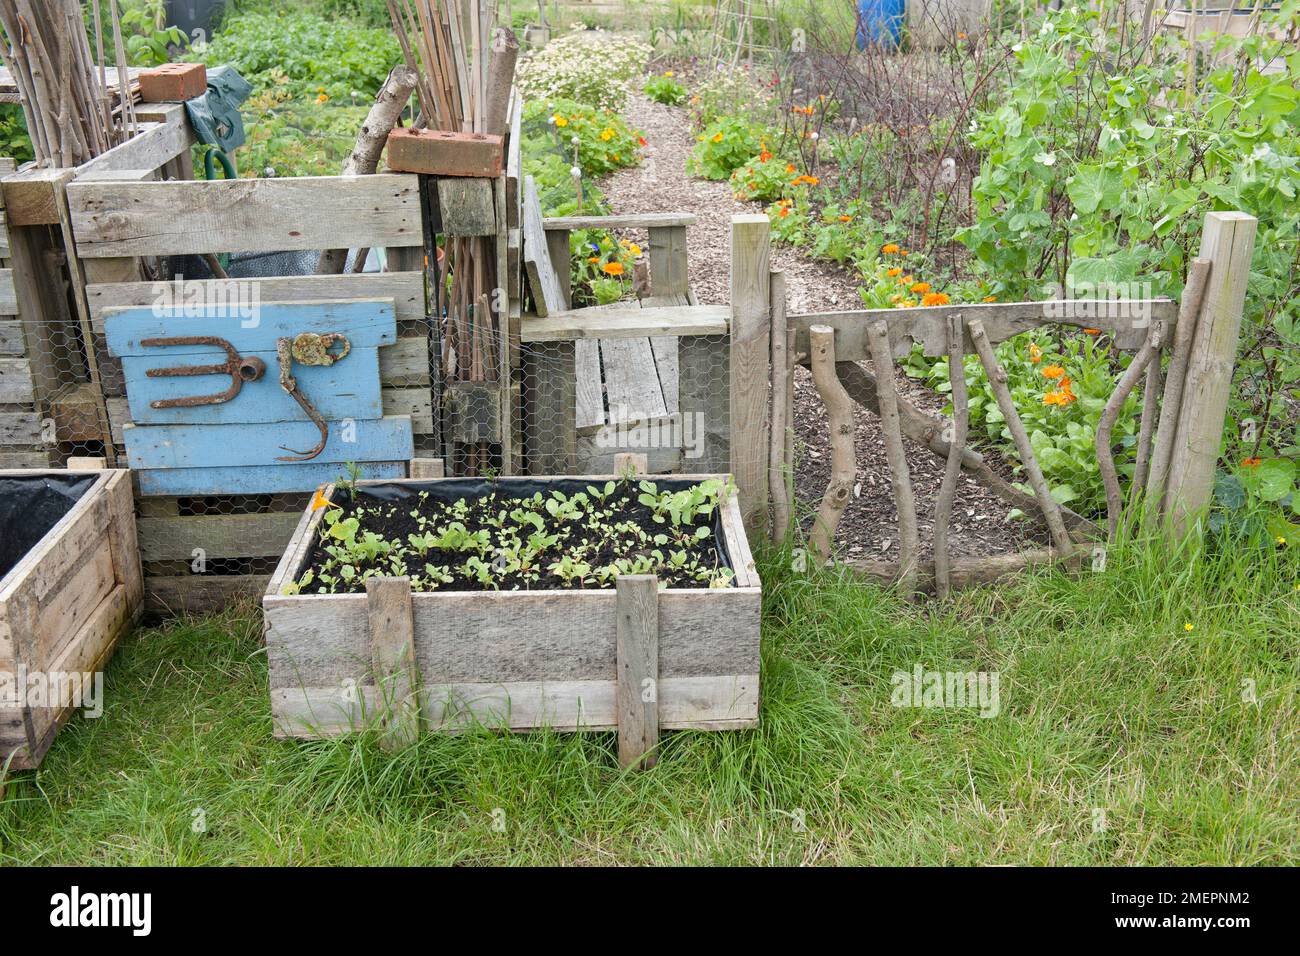 Wooden planter and gate on allotment Stock Photo